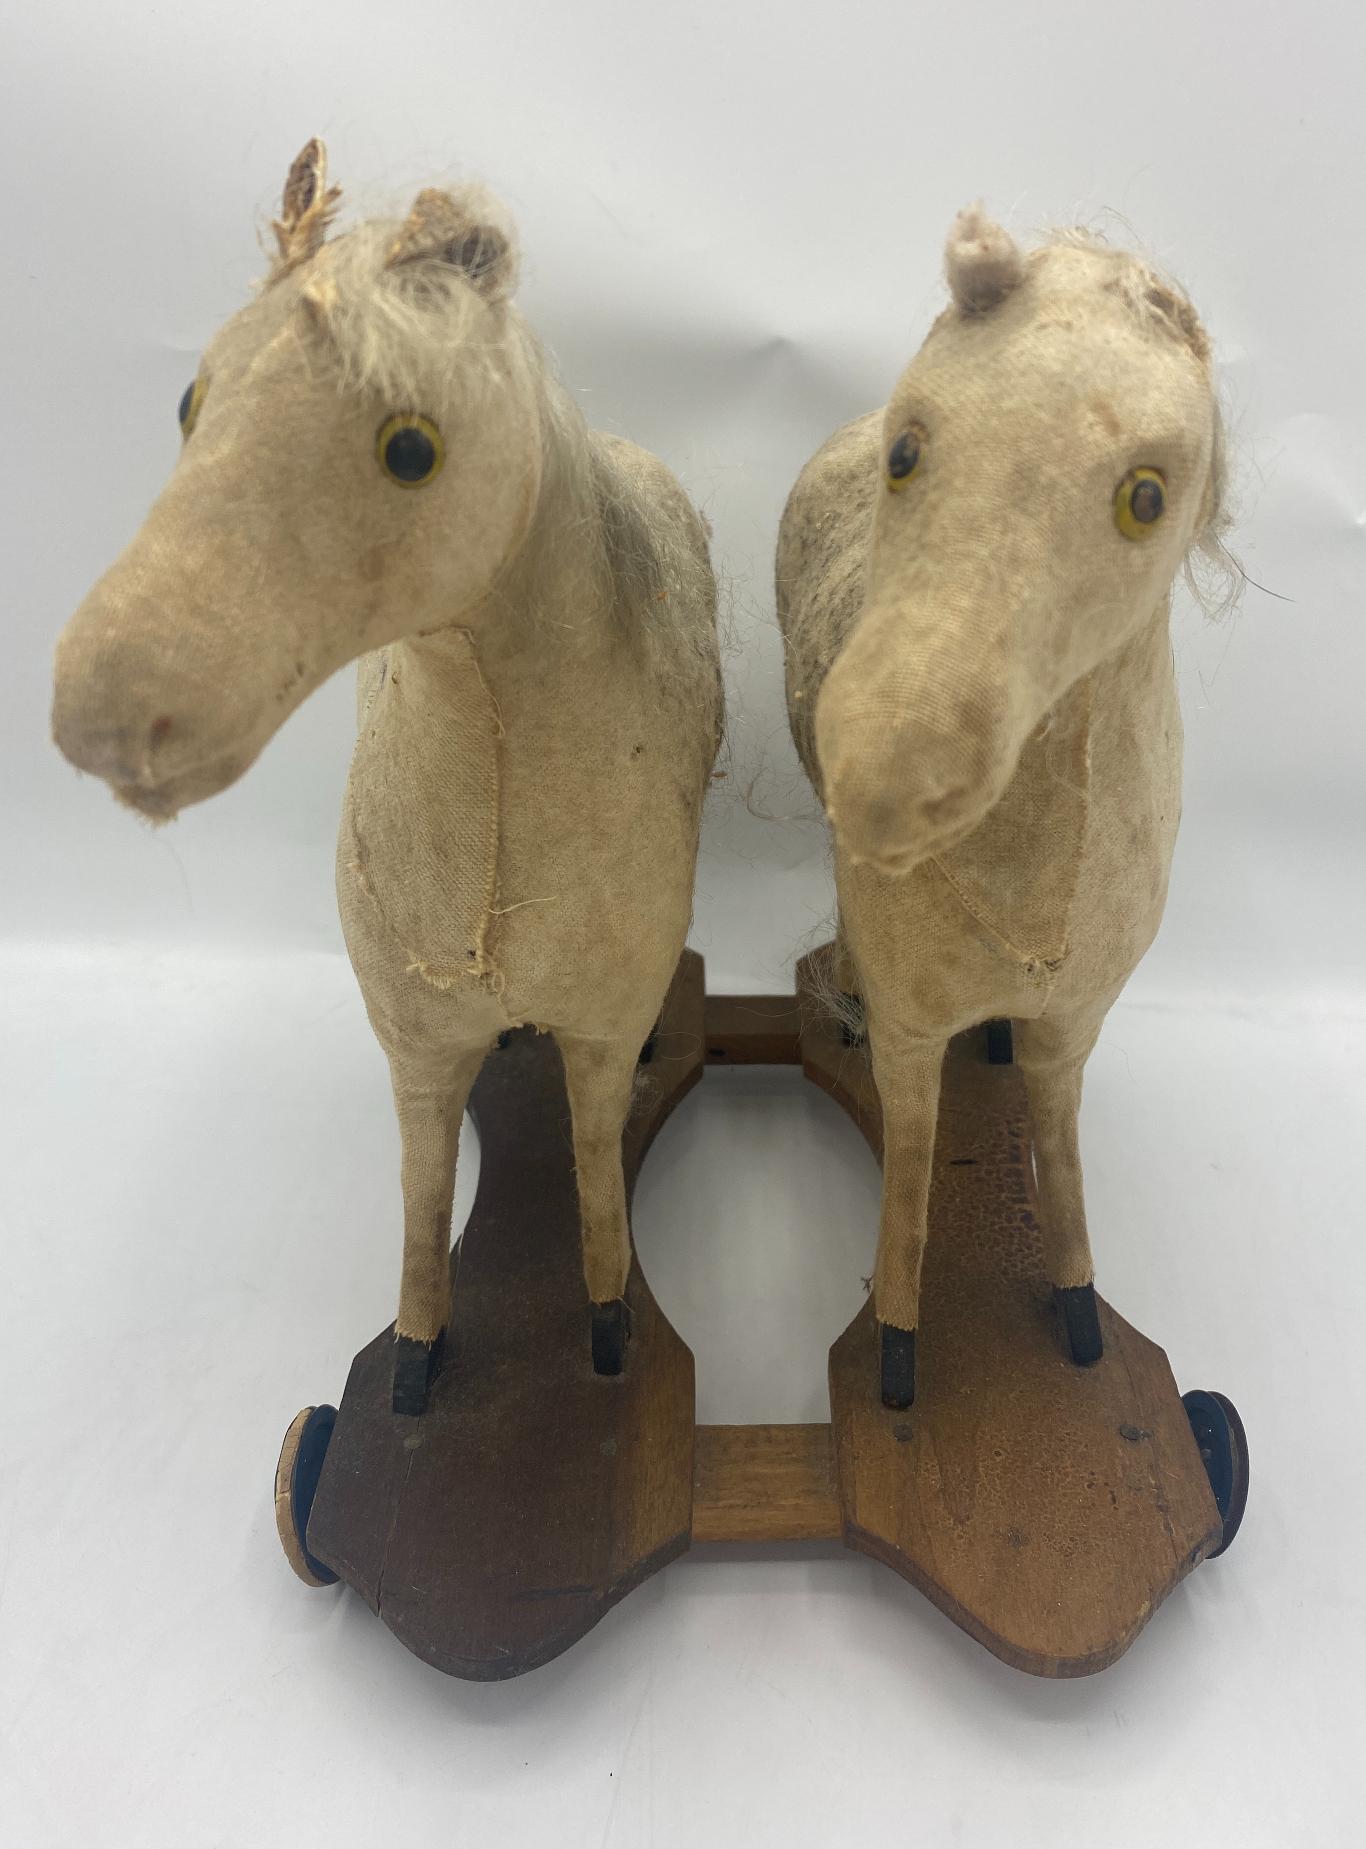 19th century American traditional children's dual horse pull toy
Made of fabric with wood planks with wheels
Measures: 10.25